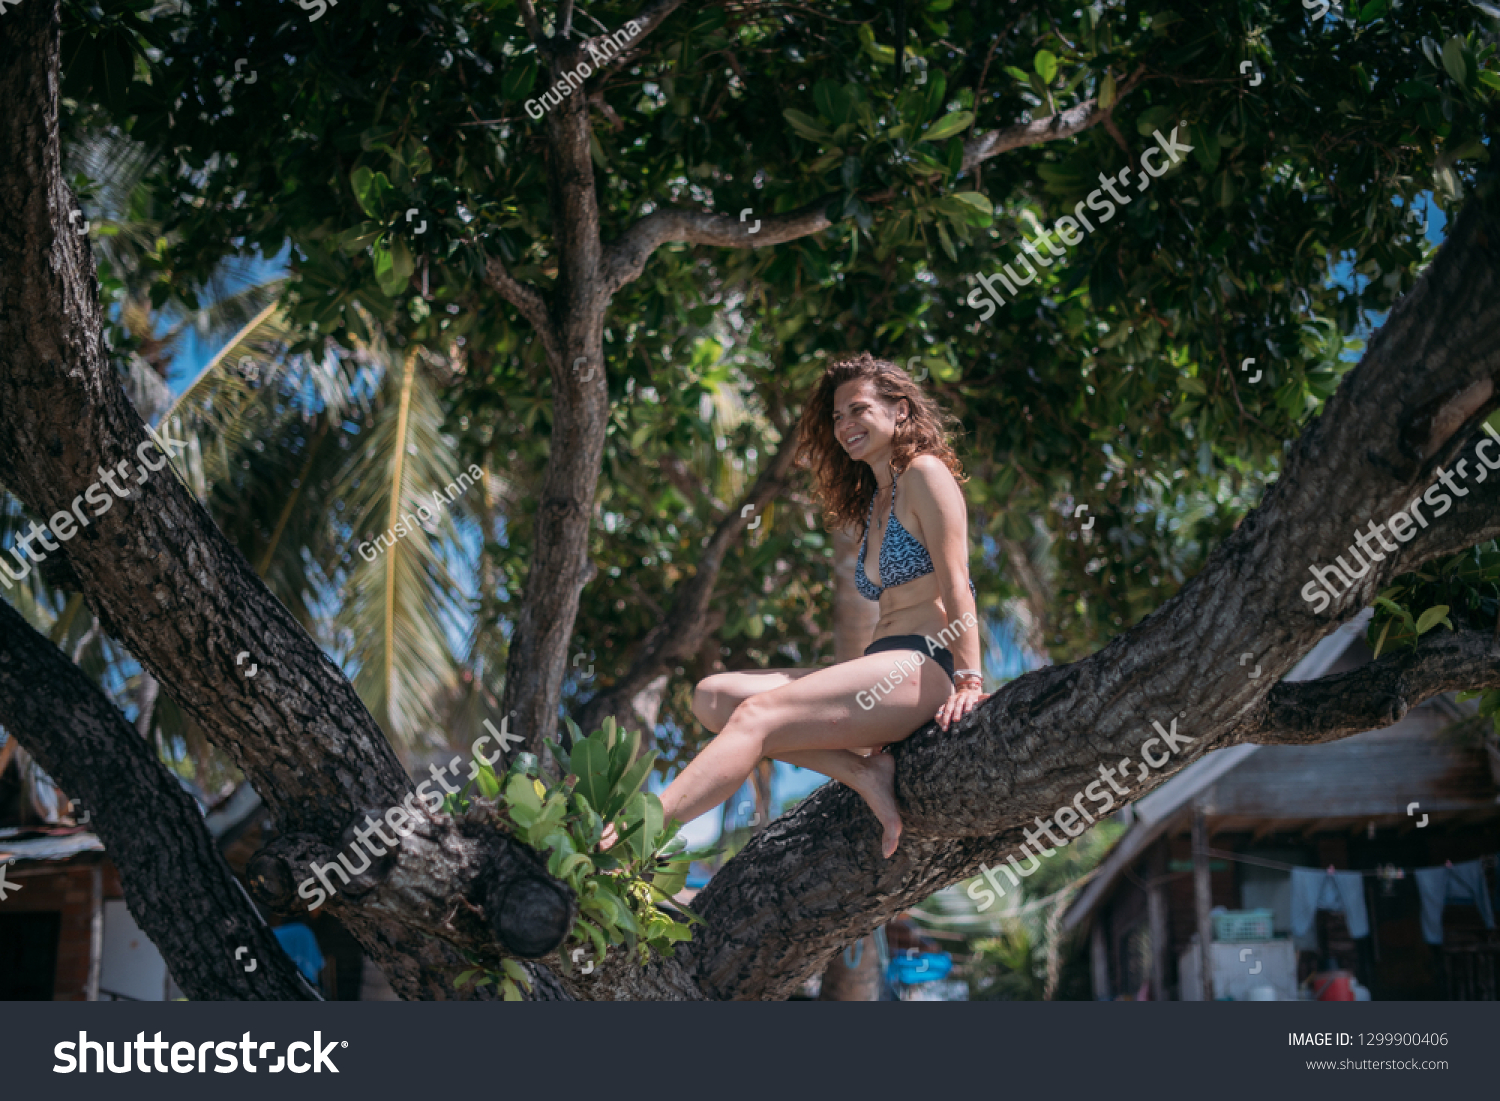 https://image.shutterstock.com/shutterstock/photos/1299900406/display_1500/stock-photo-young-beautiful-slim-woman-on-a-tree-on-the-ocean-coast-on-a-tropical-island-on-a-sunny-day-1299900406.jpg